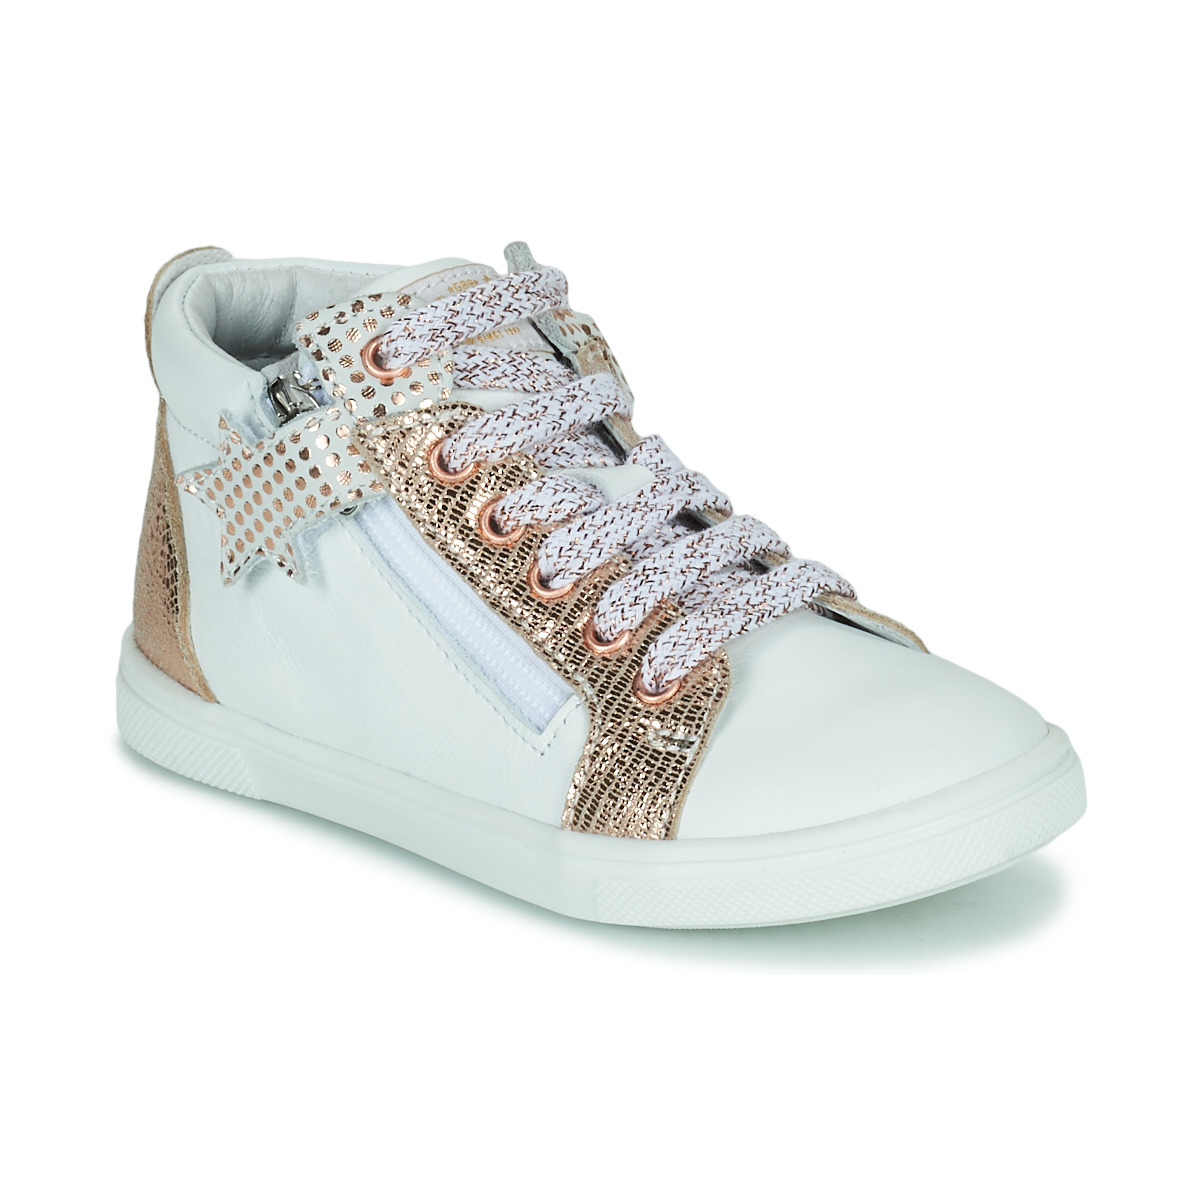 Shoes Girl Hi top trainers GBB VALA White